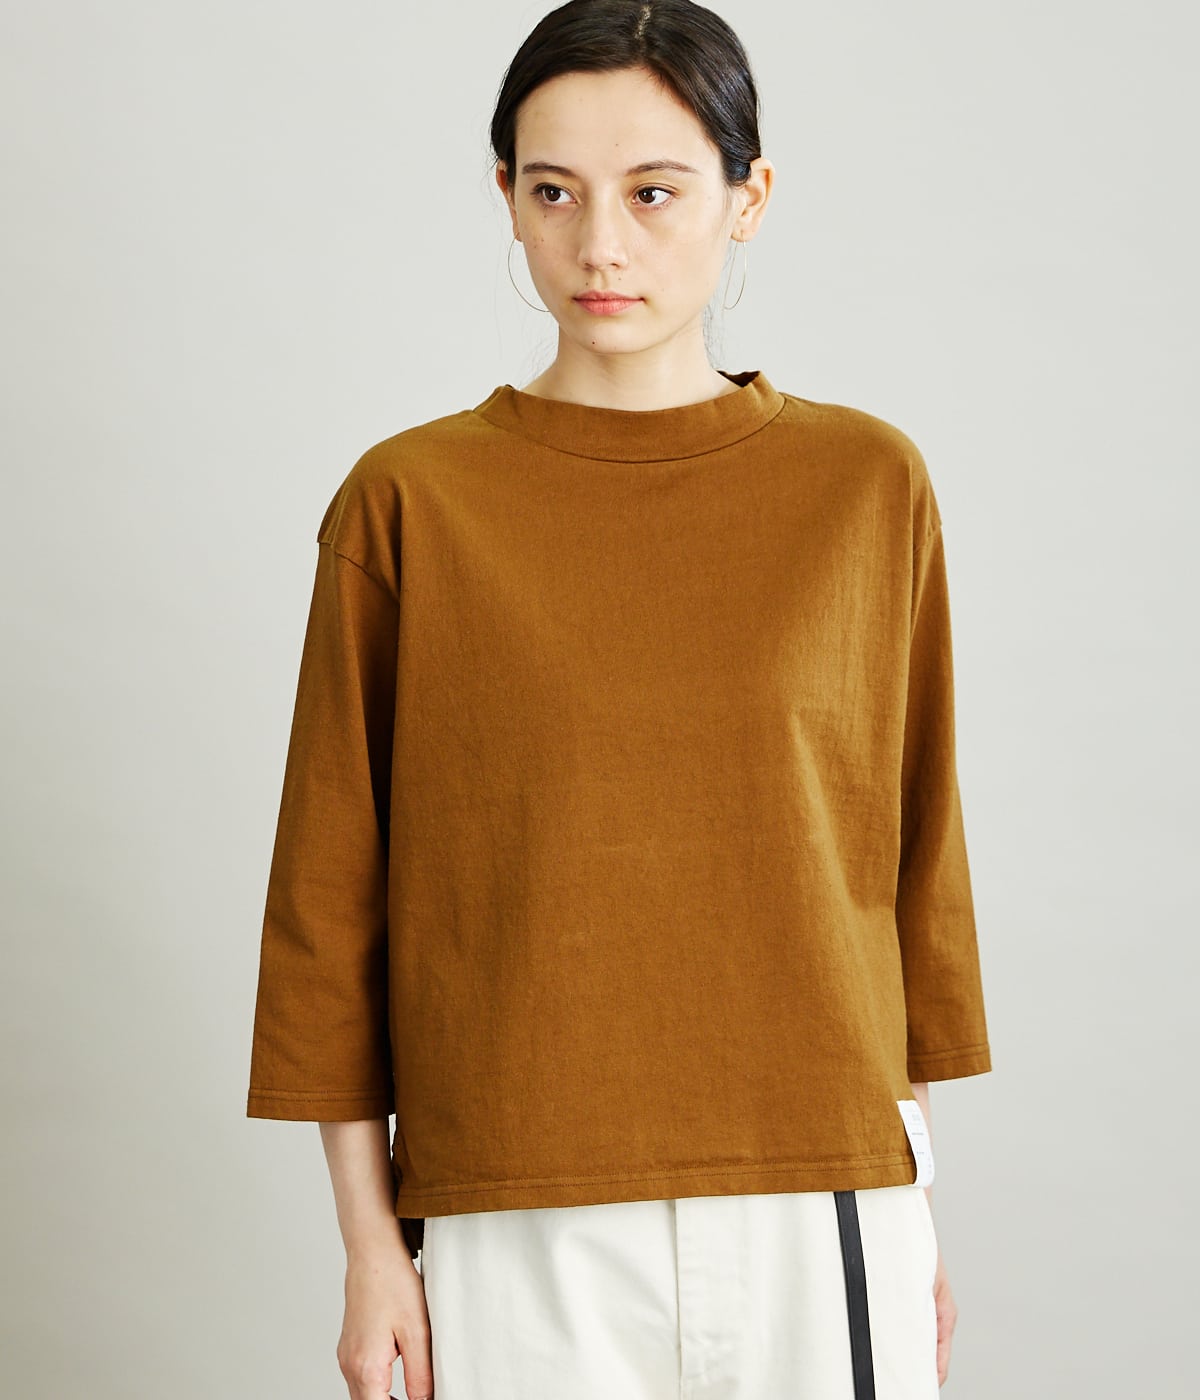 Dry Cotton Jersey ハイネックカットソー